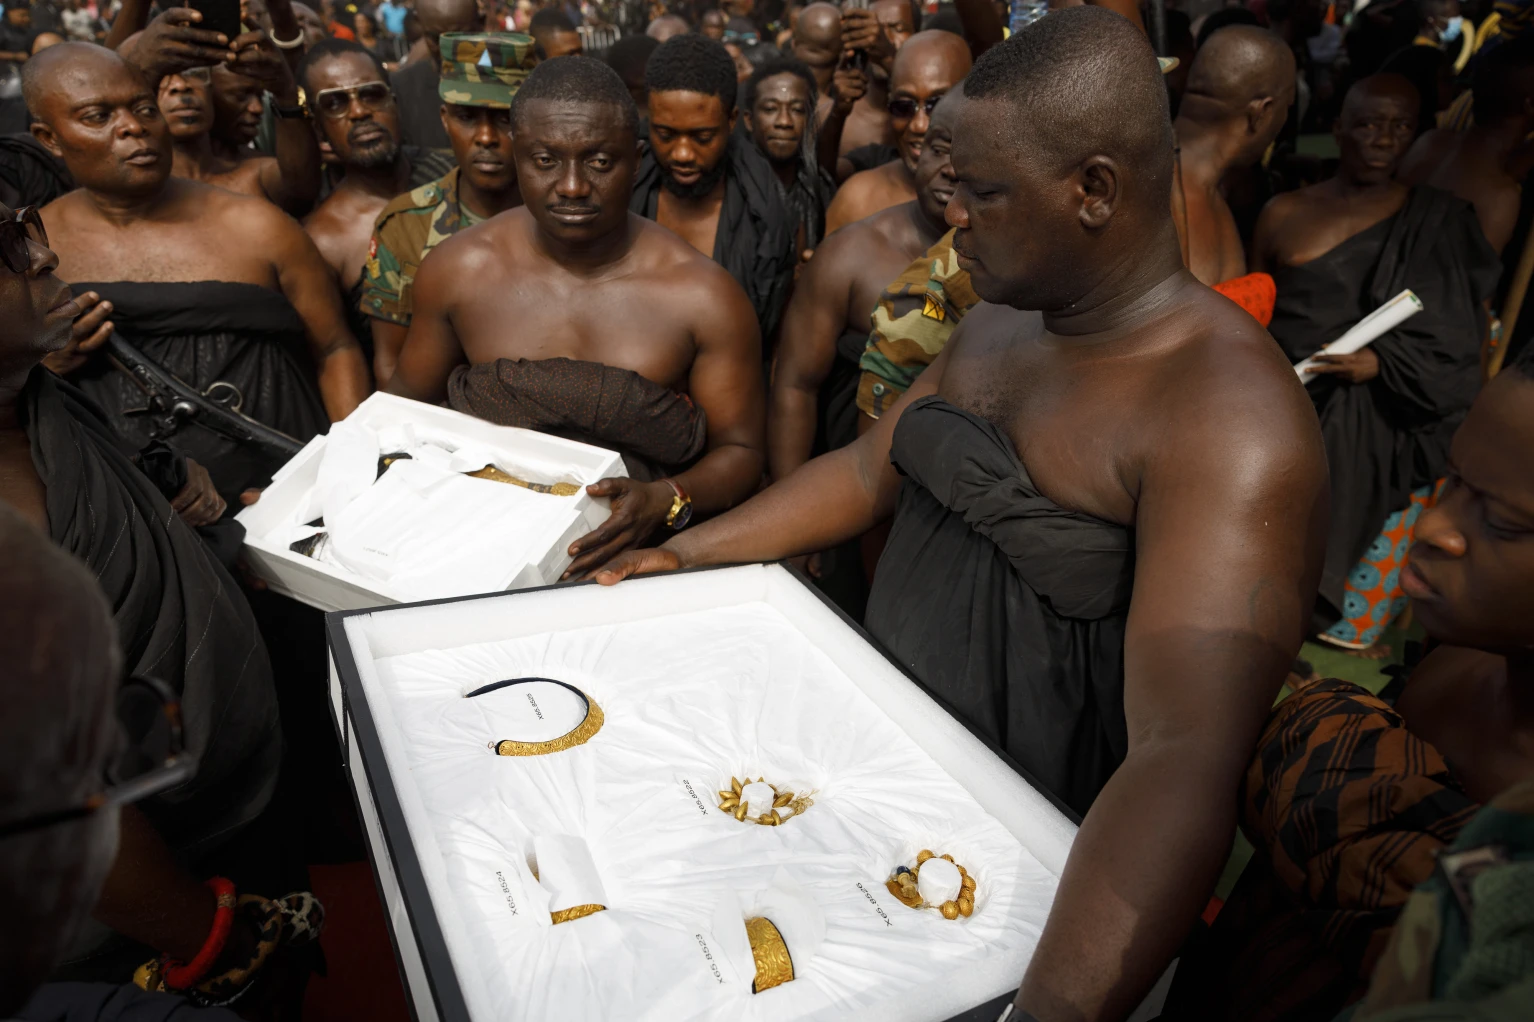 Ghana artifacts looted from Asante Kingdom 150 years ago by British forces returned by US museum